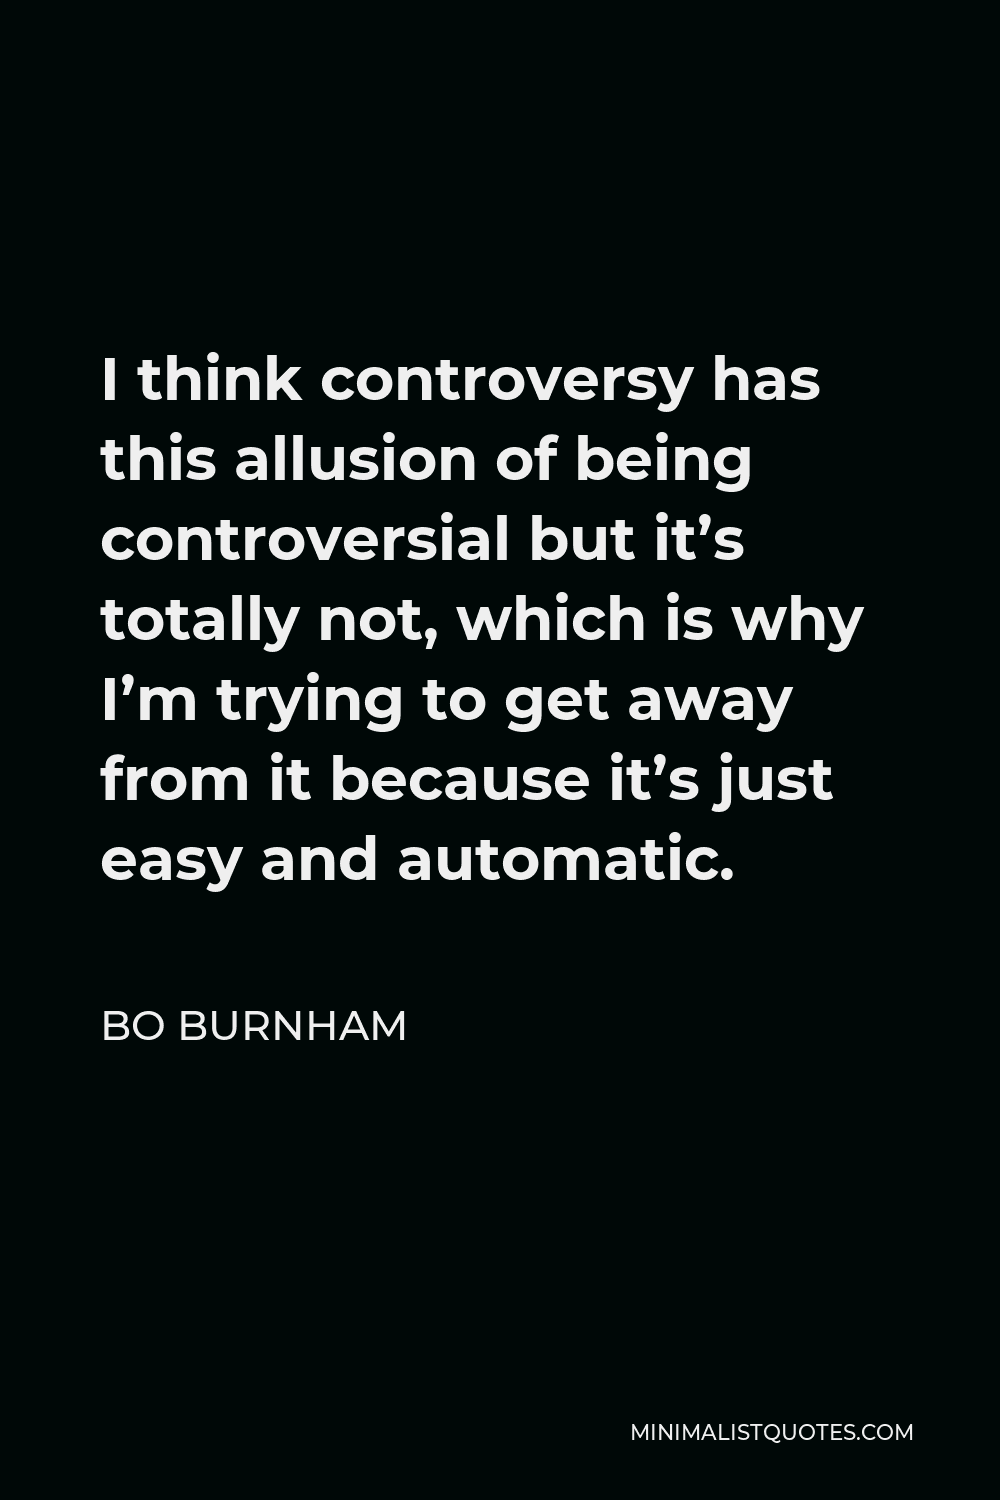 Bo Burnham Quote - I think controversy has this allusion of being controversial but it’s totally not, which is why I’m trying to get away from it because it’s just easy and automatic.